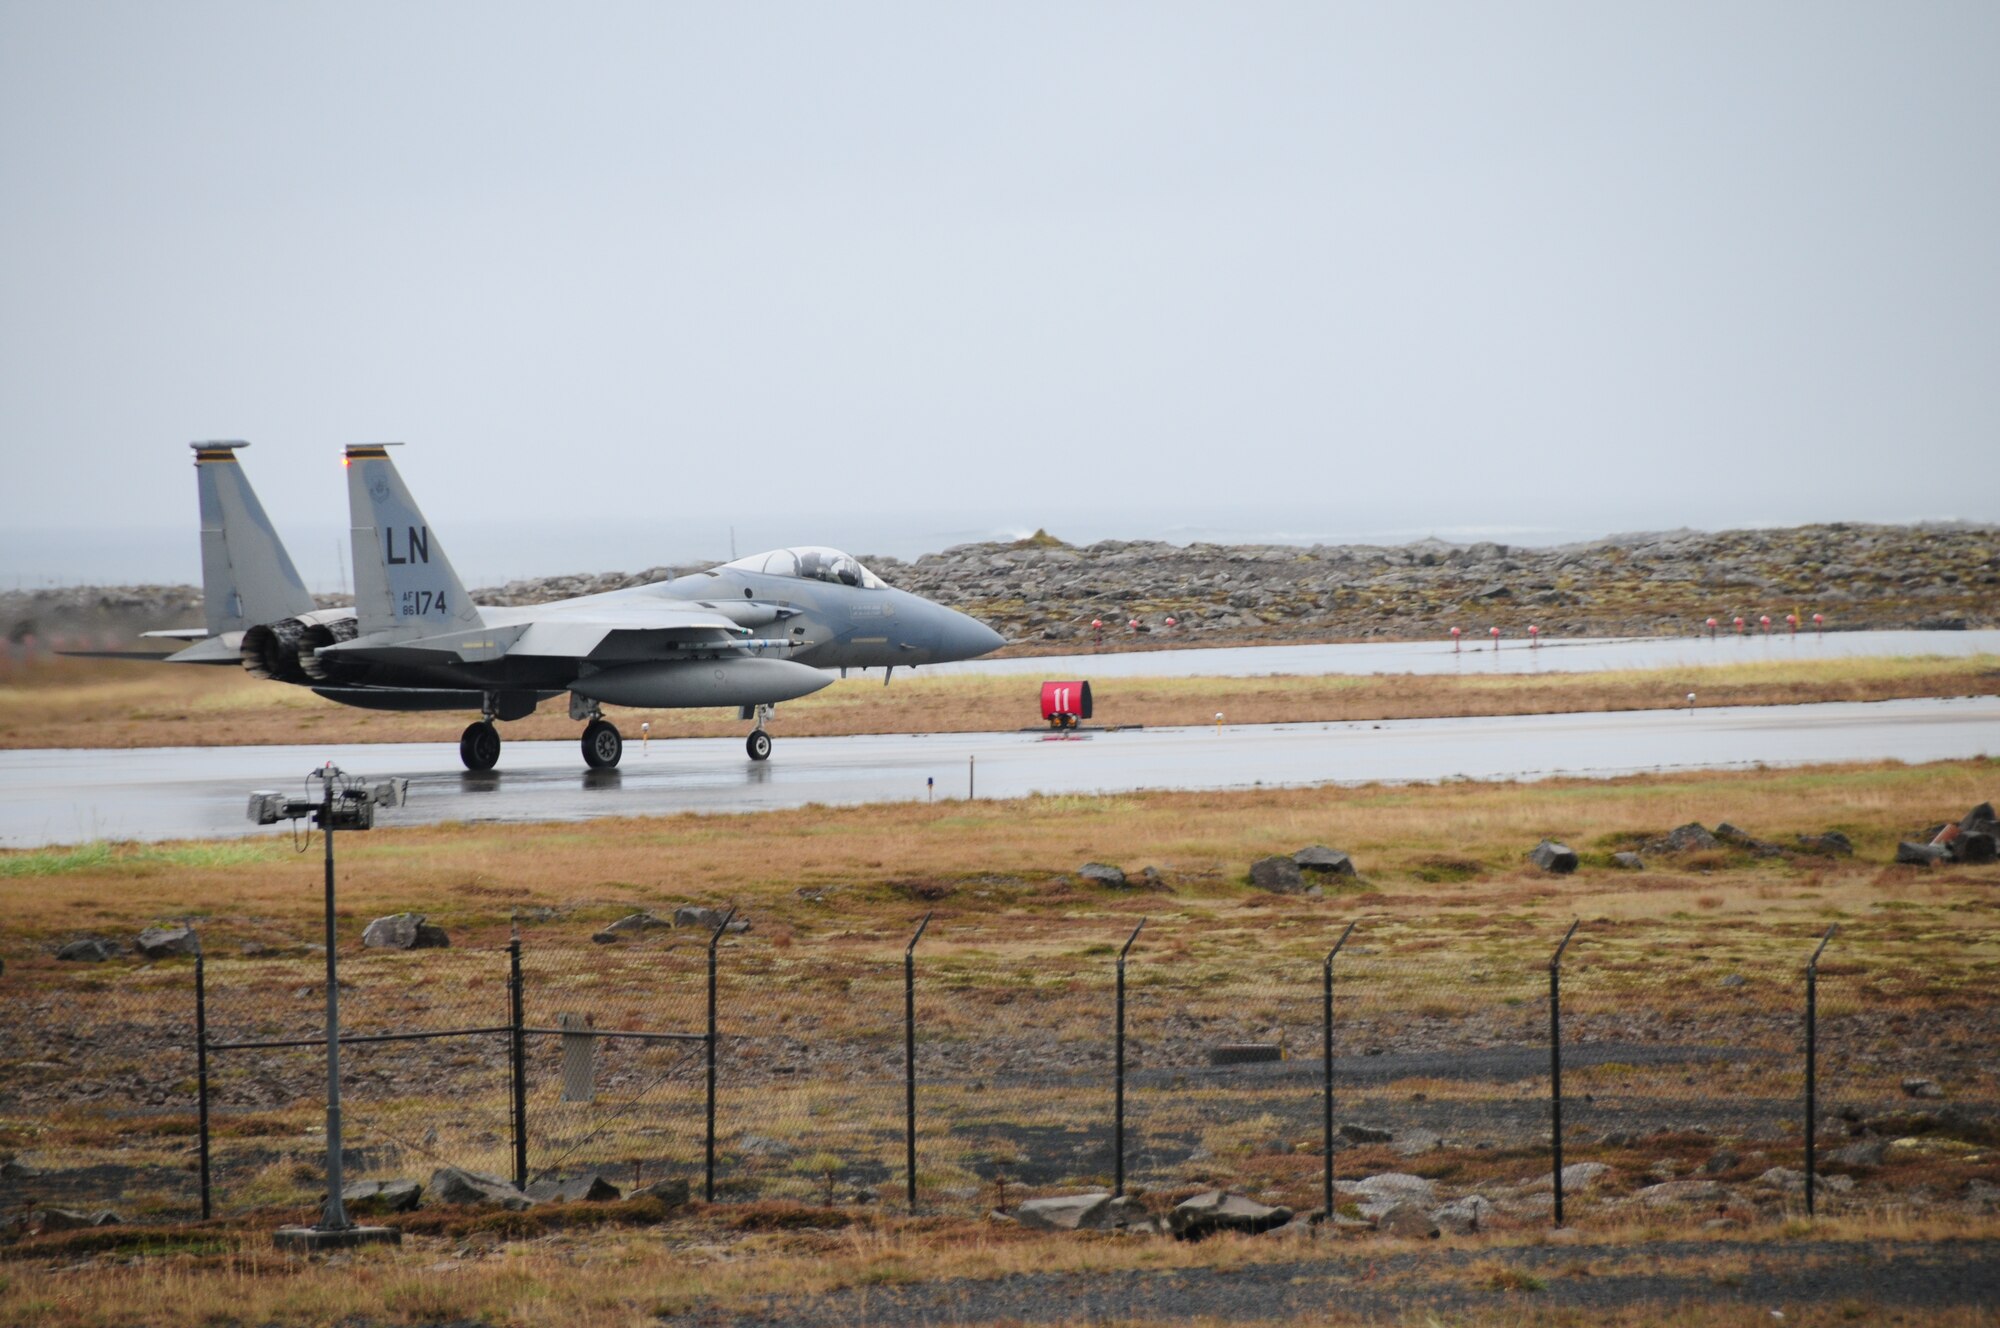 KEFLAVIK, Iceland – An F-15C Eagle taxis before taking flight to return to the 48th Fighter Wing at RAF Lakenheath, England, after the 493rd Expeditionary Fighter  Squadron’s completed its portion of NATO’s Icelandic Air Policing Mission on Sept. 24. Approximately 200 Airmen were deployed from all over the globe to comprise the 493rd EFS and ensure the mission’s success. (U.S. Air Force photo/Senior Airman Stephen Linch) 